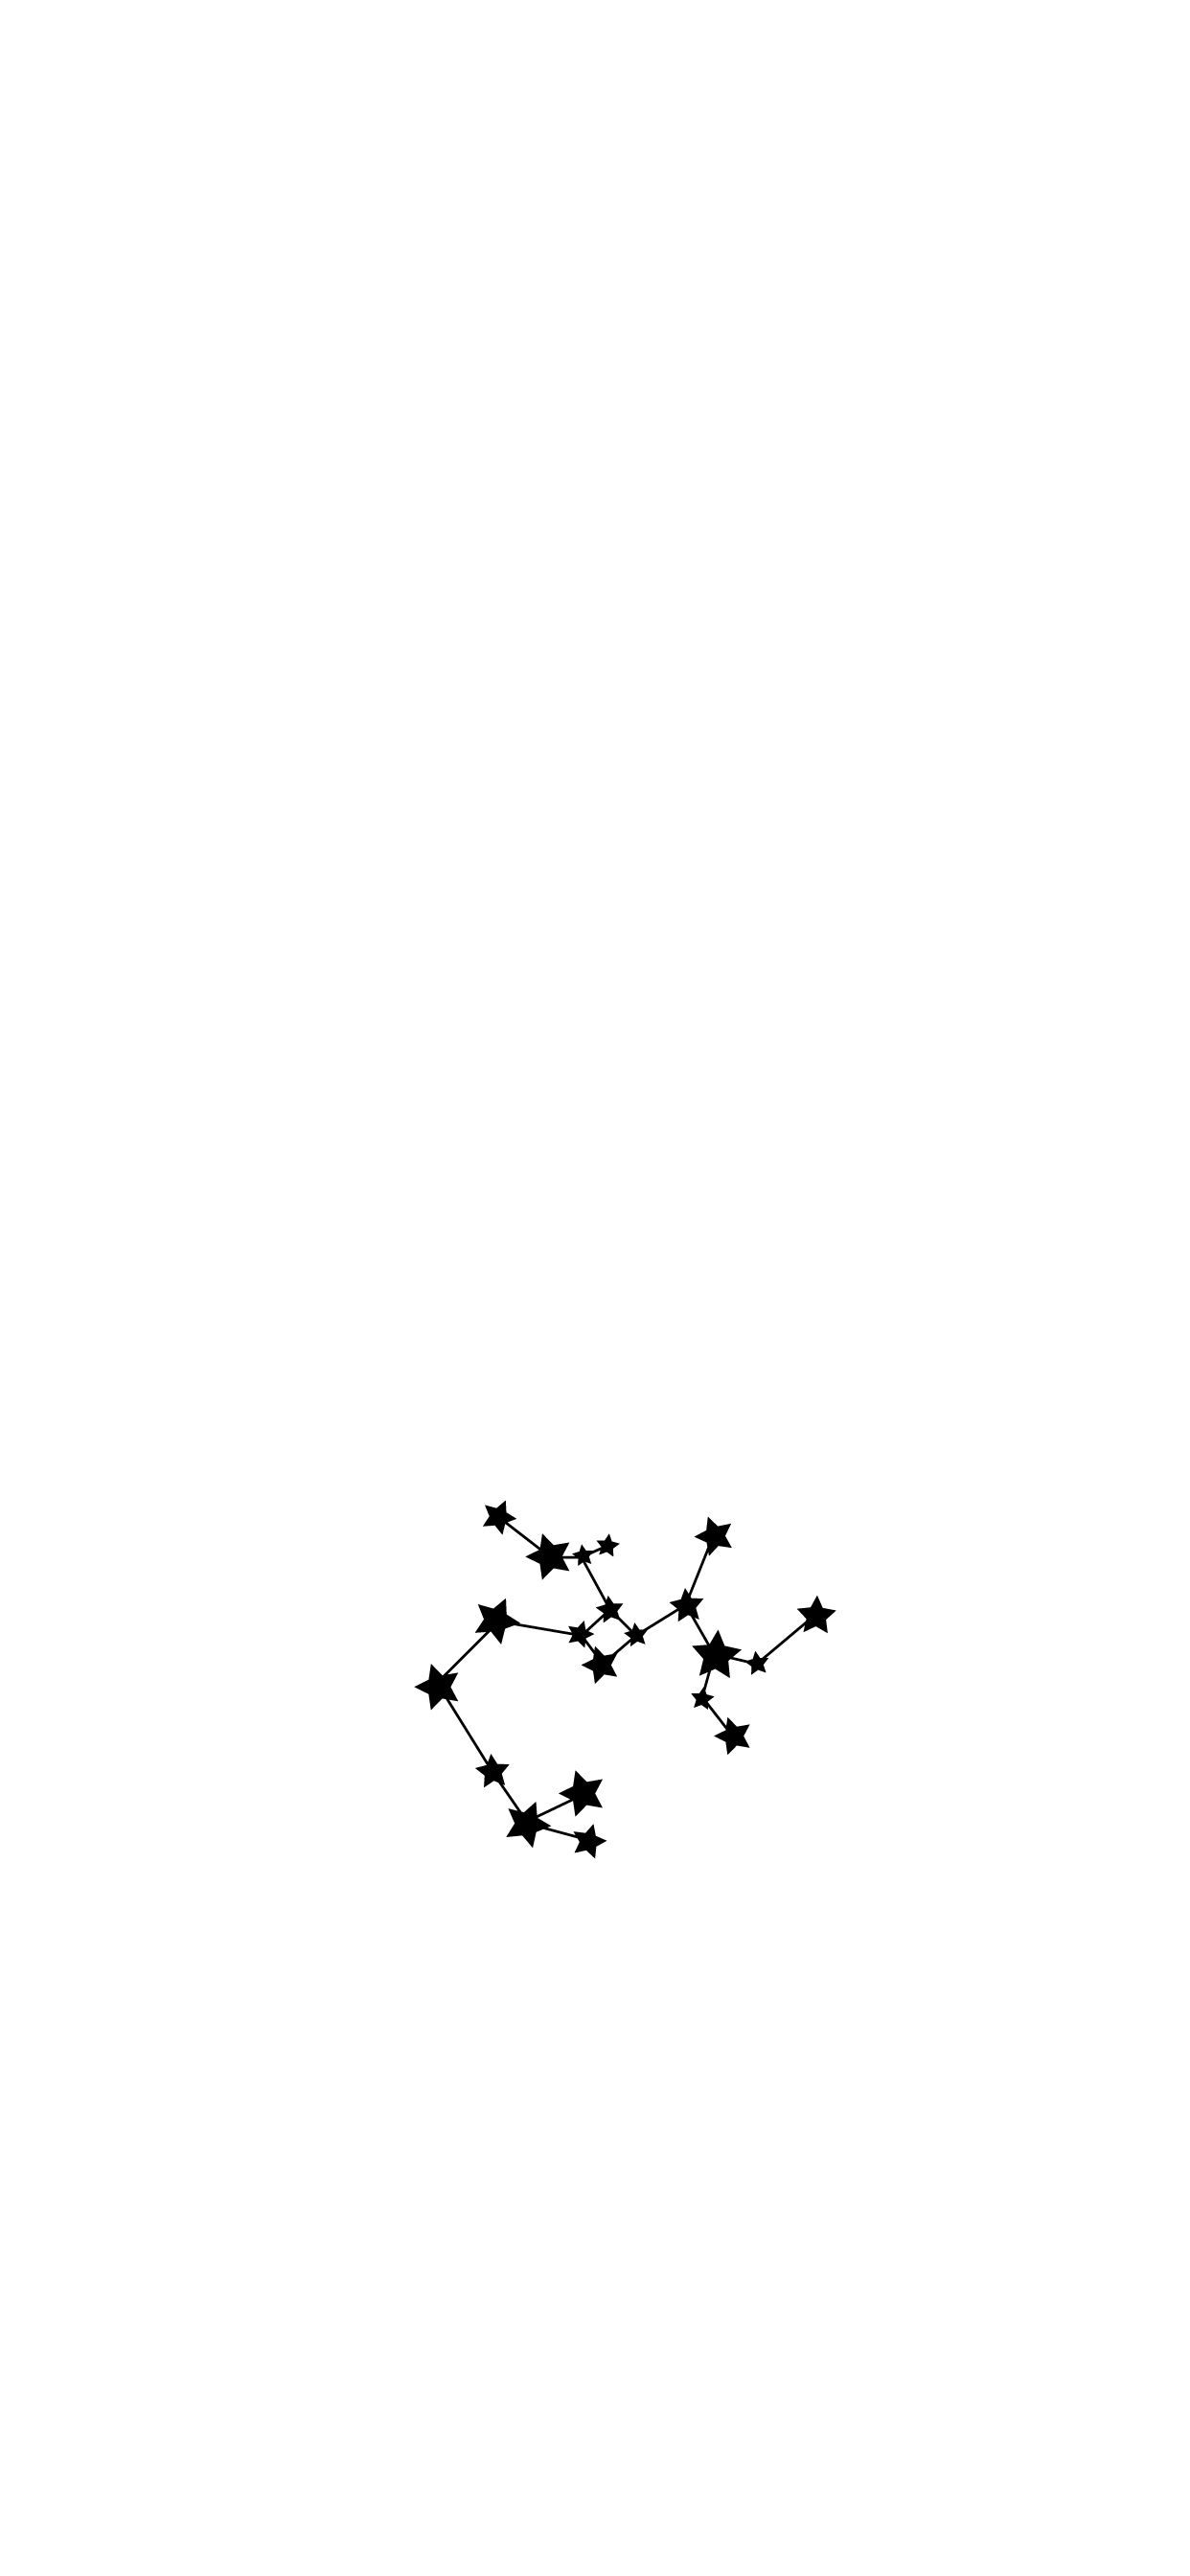 A black and white drawing of the word 'connect' - Sagittarius